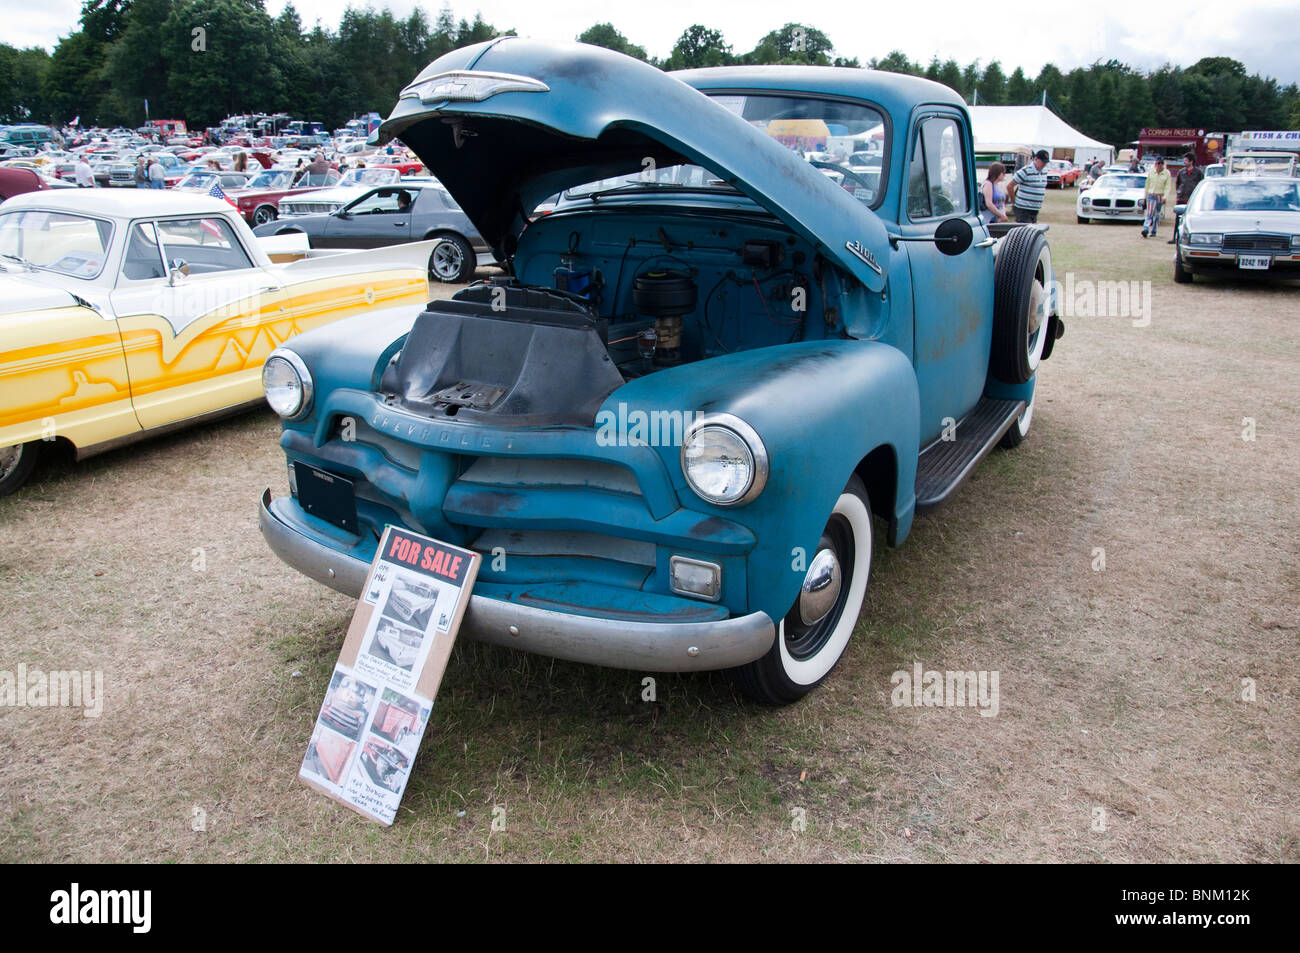 The front of a Chevrolet Pick-up truck at an American car show on 4th July 'Independence day' Stock Photo